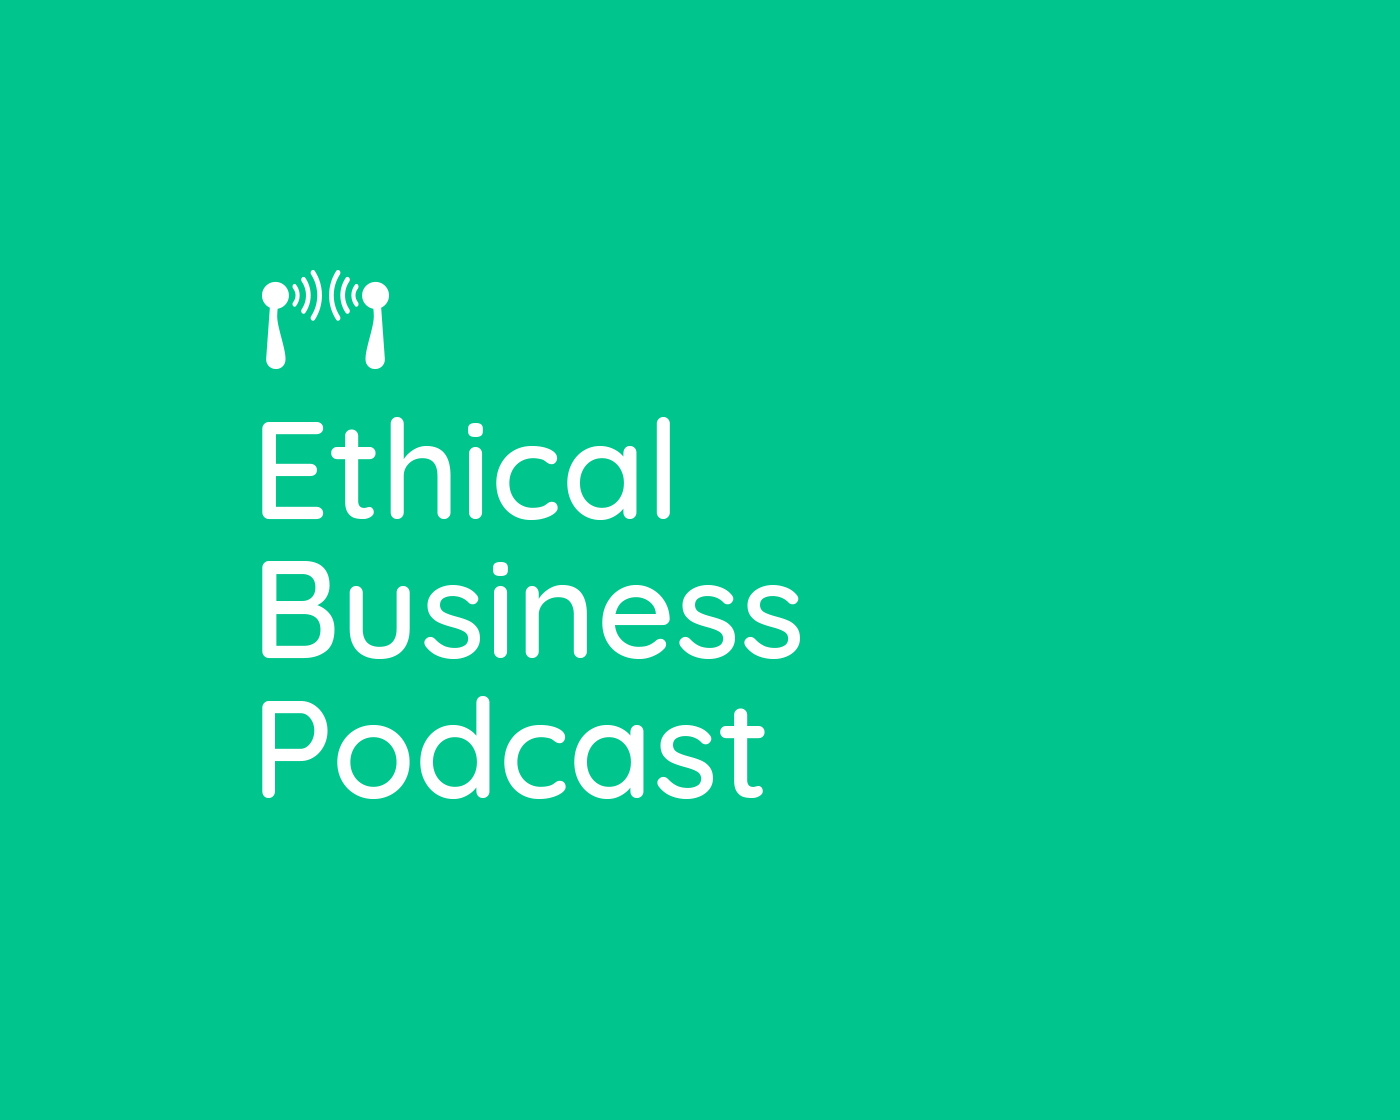 Ethical business podcast graphic solid green background